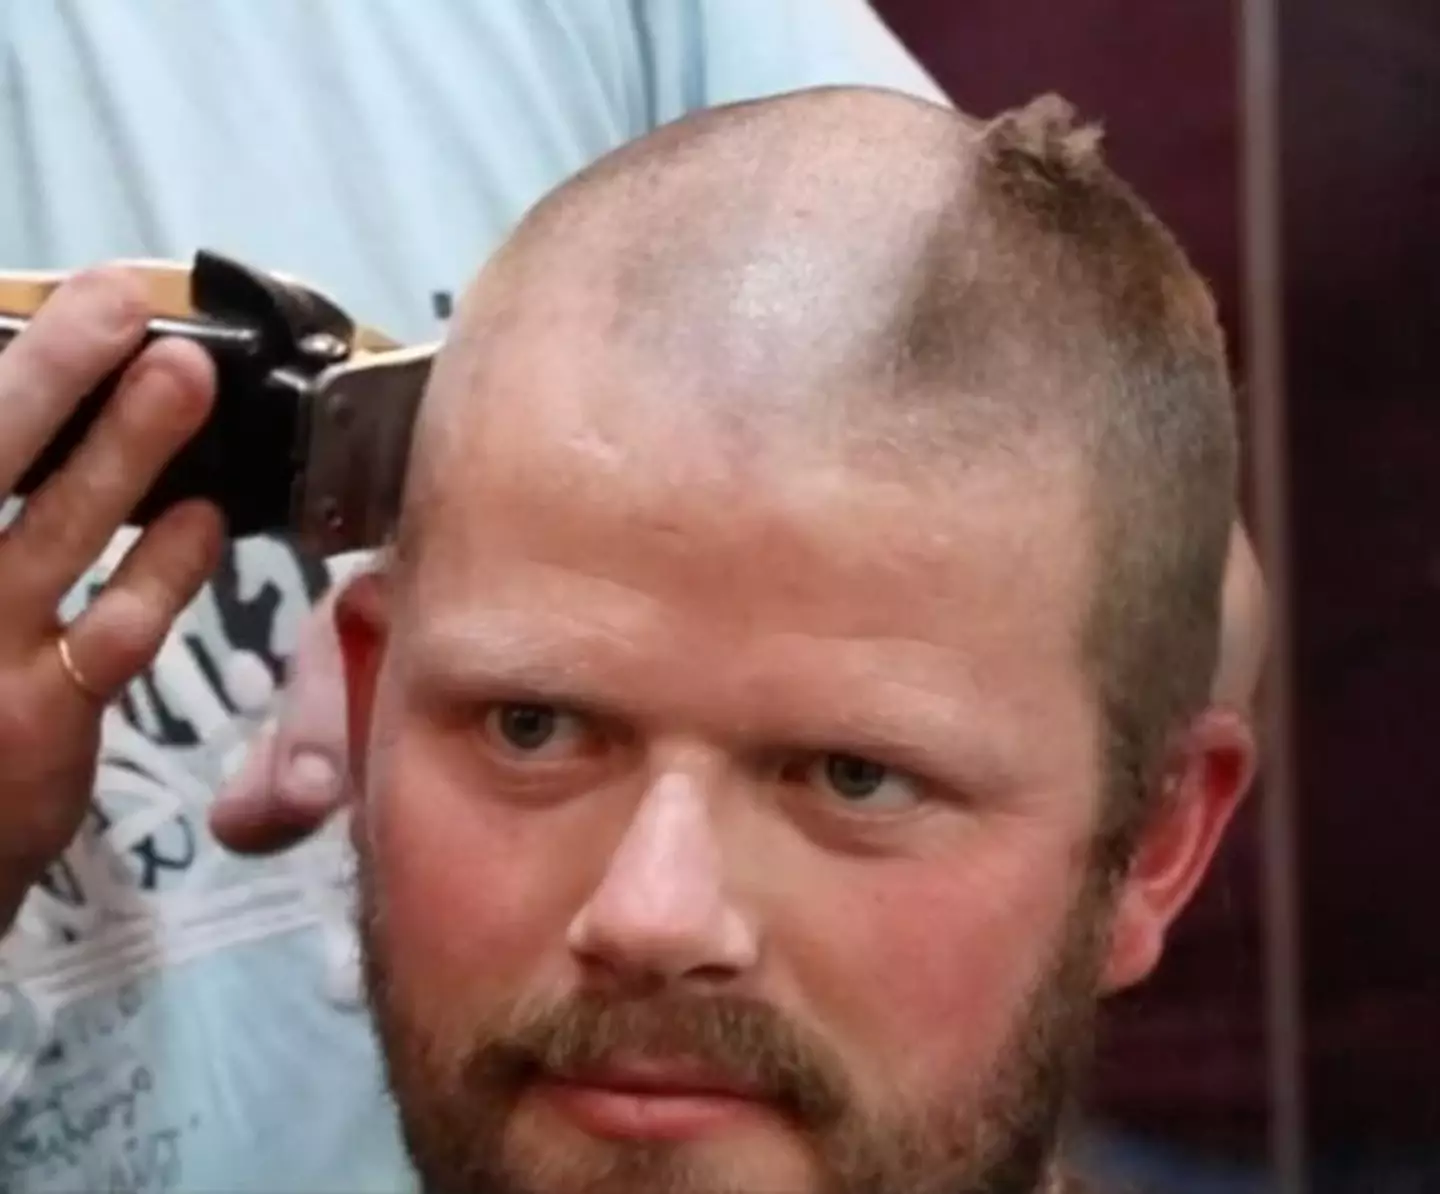 Scott Sibley shaved his head back in 2018 to support and comfort his young daughter who was battling cancer.